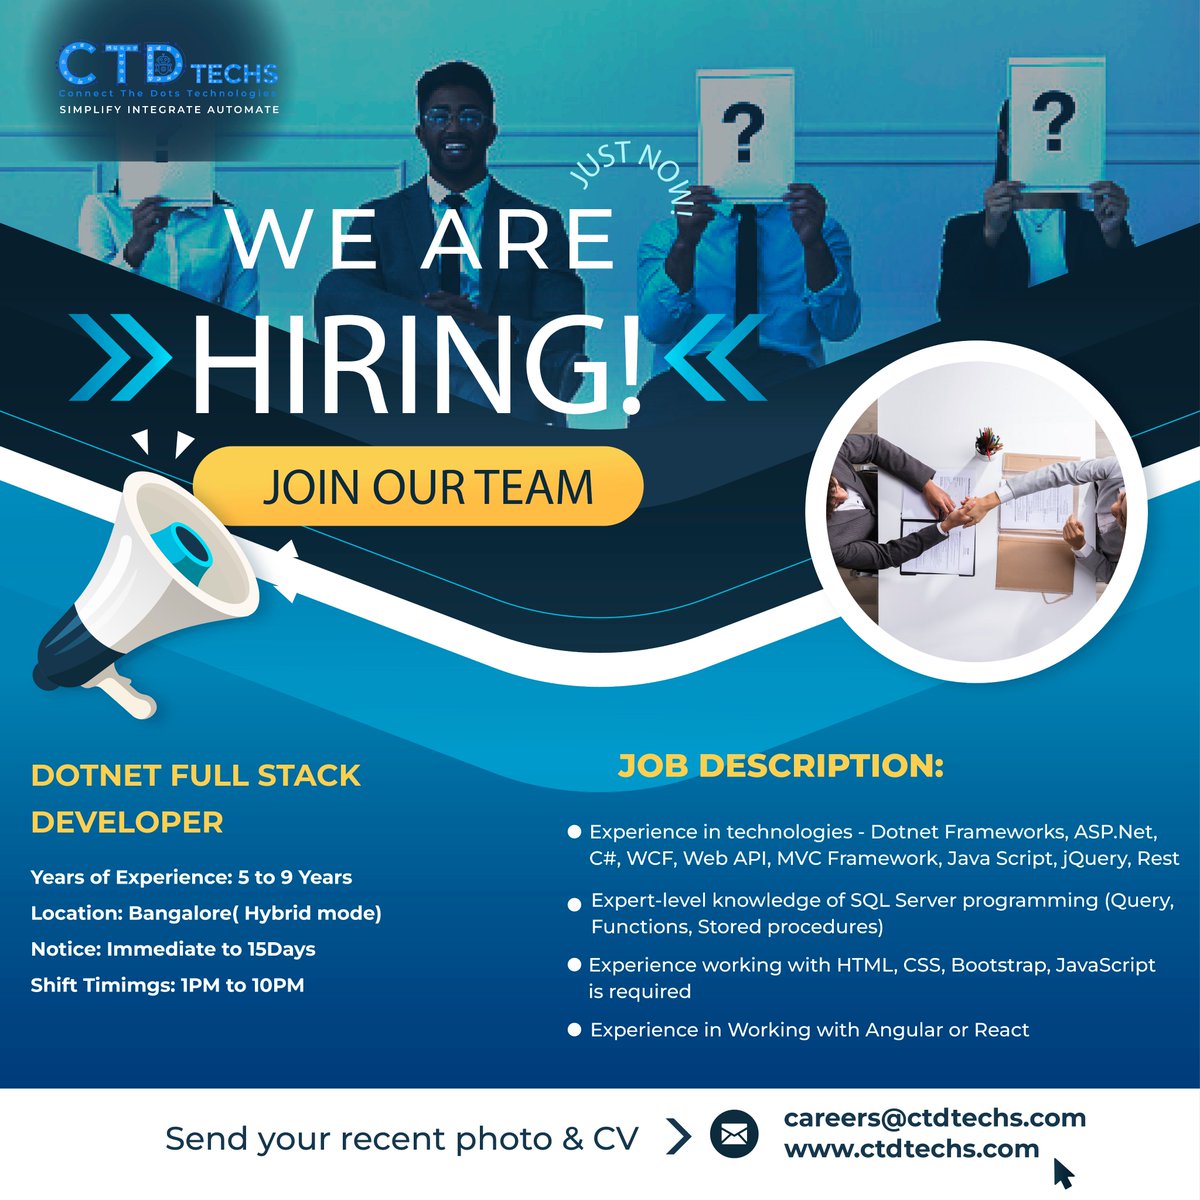 We're hiring talented Asp .NET full-stack developers to join our team! If you're passionate about coding, problem-solving, and creating innovative solutions, we want to hear from you.

Share your CV to
careers@ctdtechs.com

#dotnetdeveloper #hiring #codingpassion #hiringnow